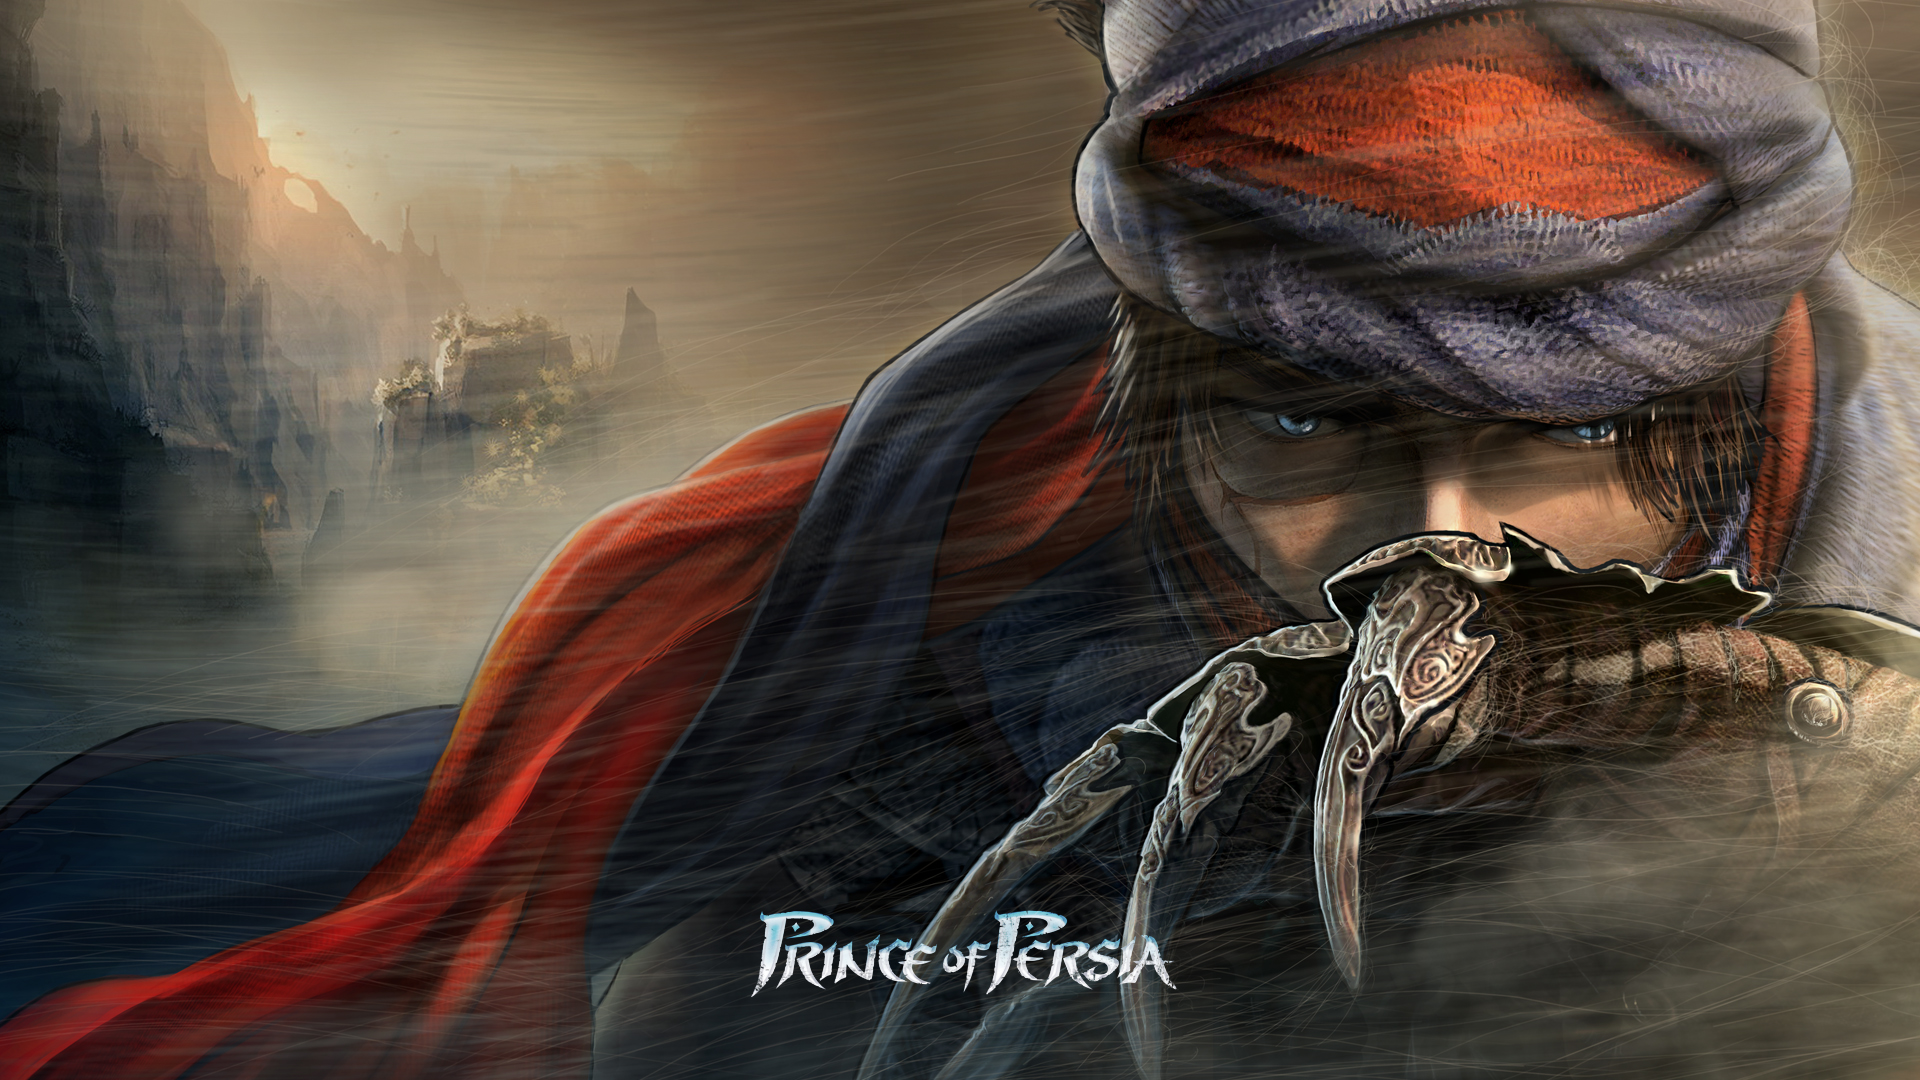 Wallpapers Prince of persia